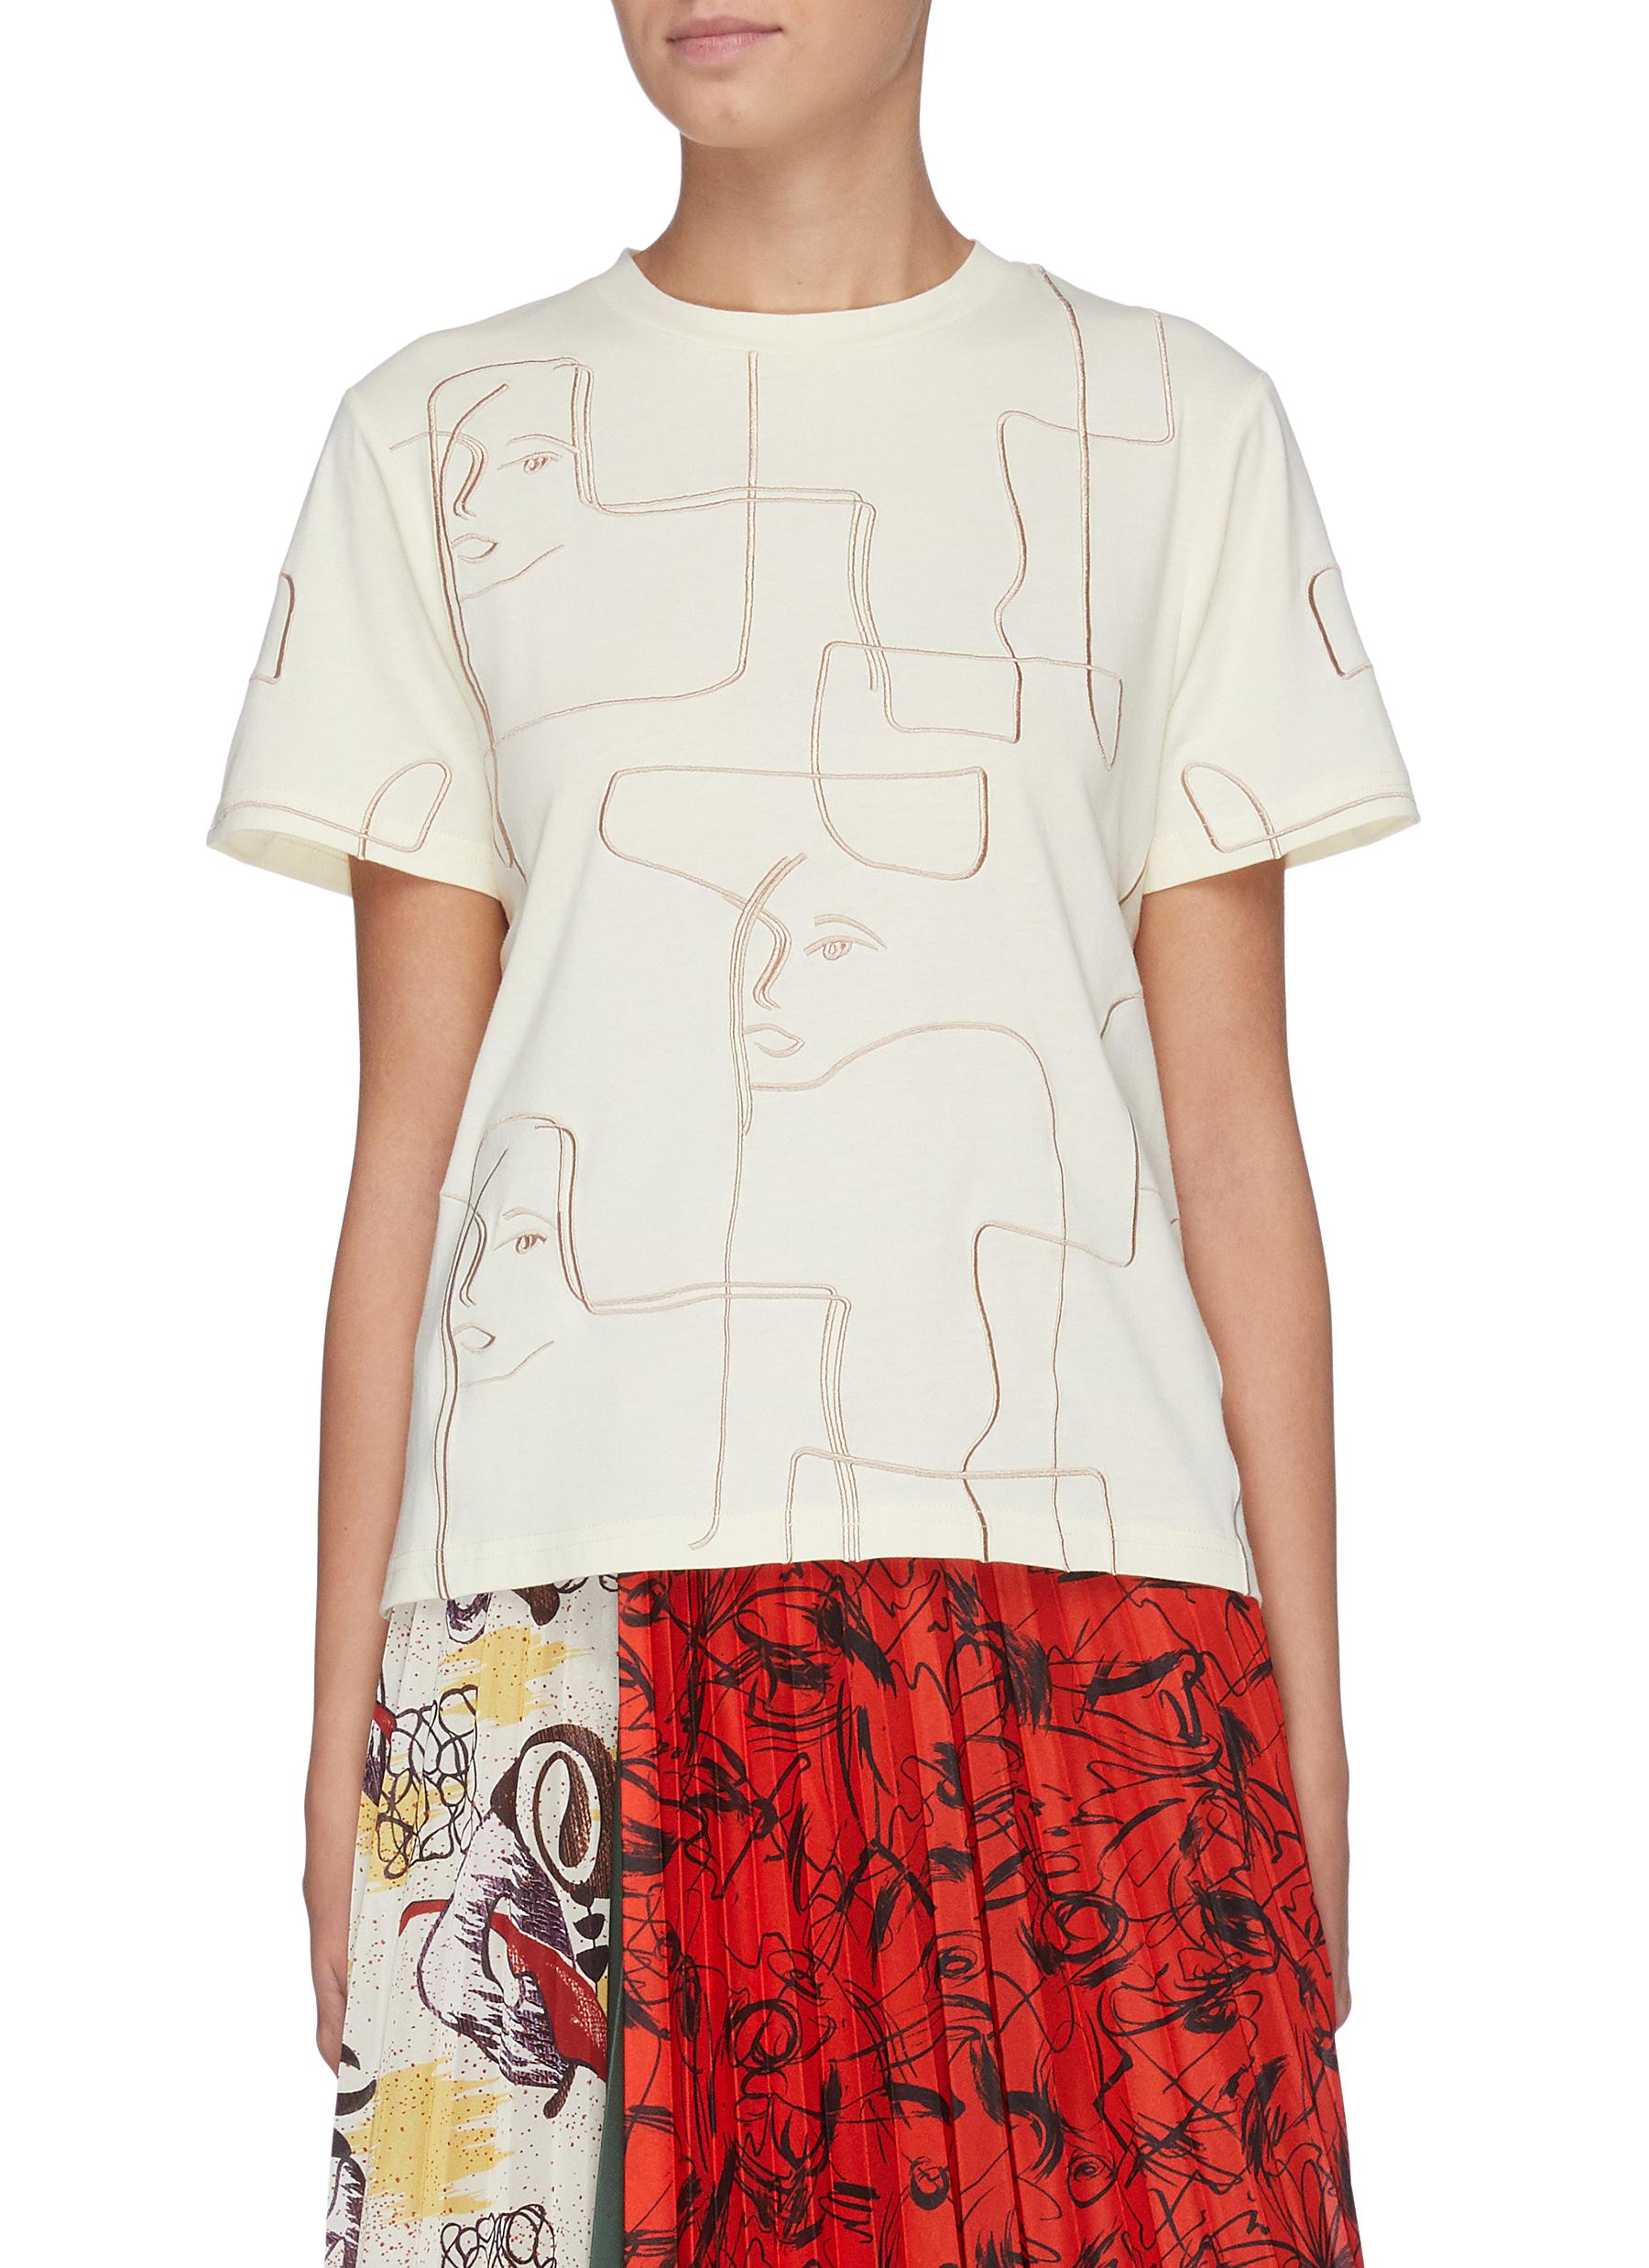 Savis Look About You graphic embroidered T-shirt by C/Meo Collective